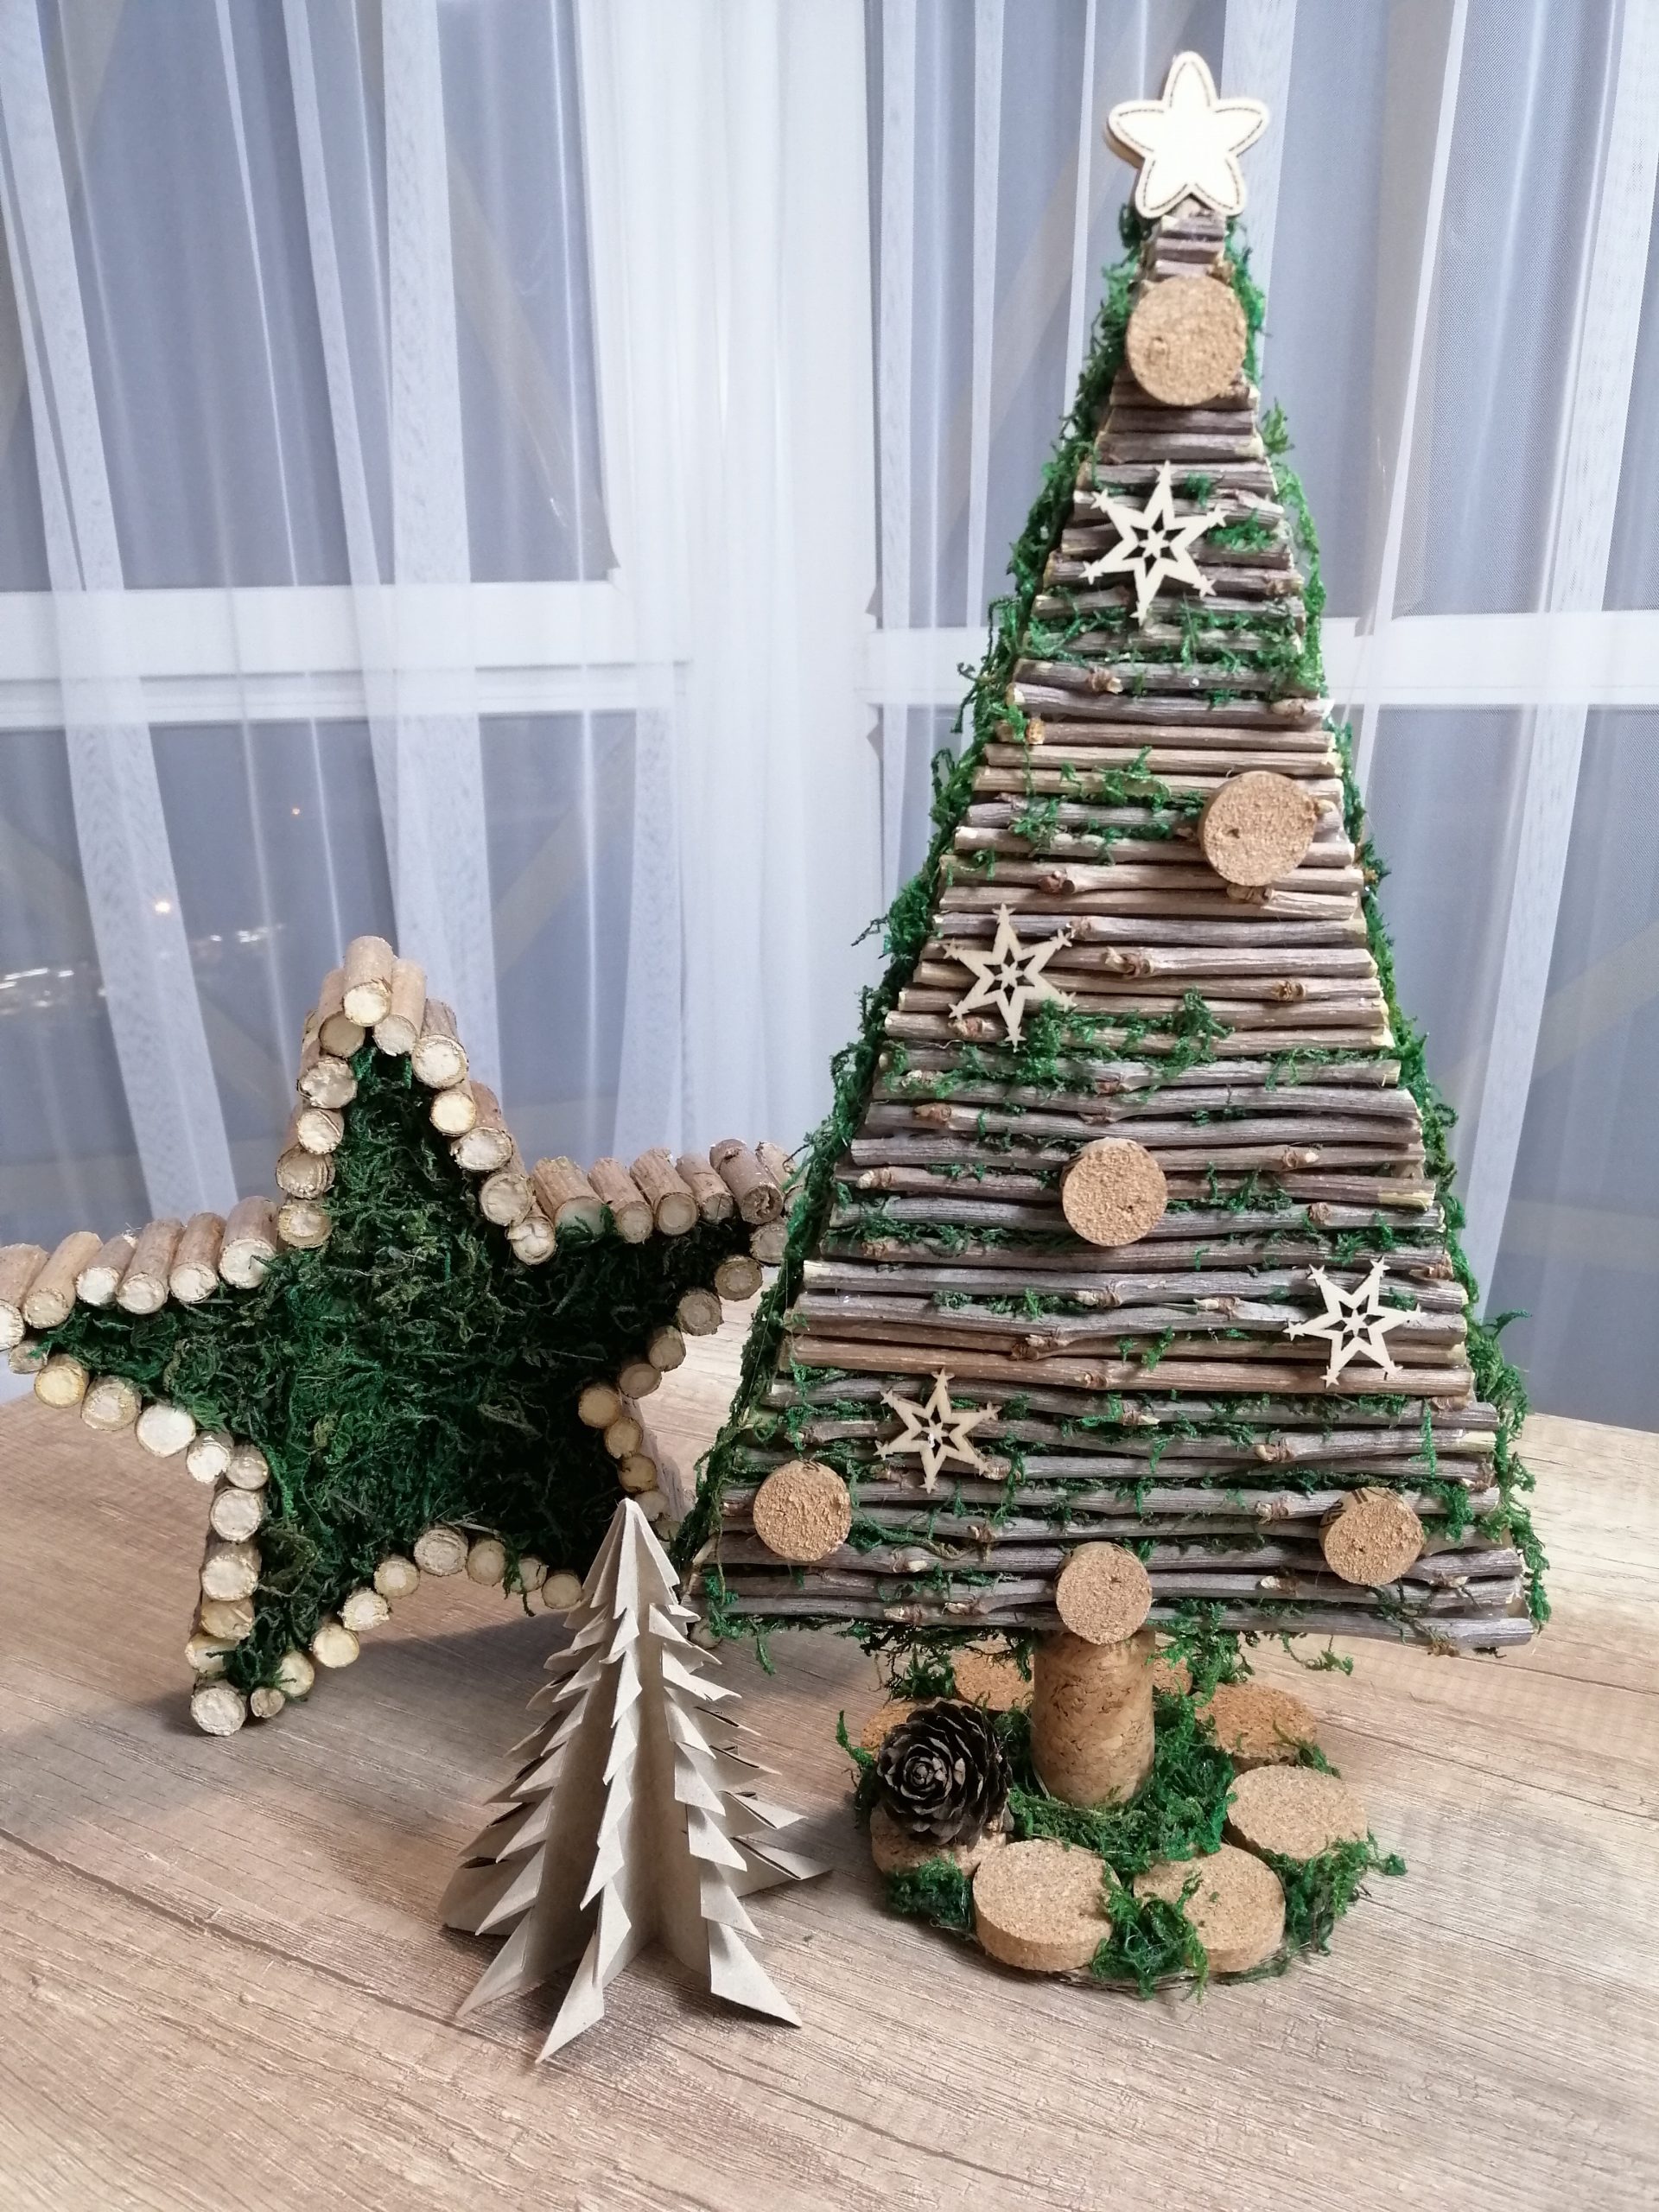 How to make a Christmas tree out of twigs and cardboard